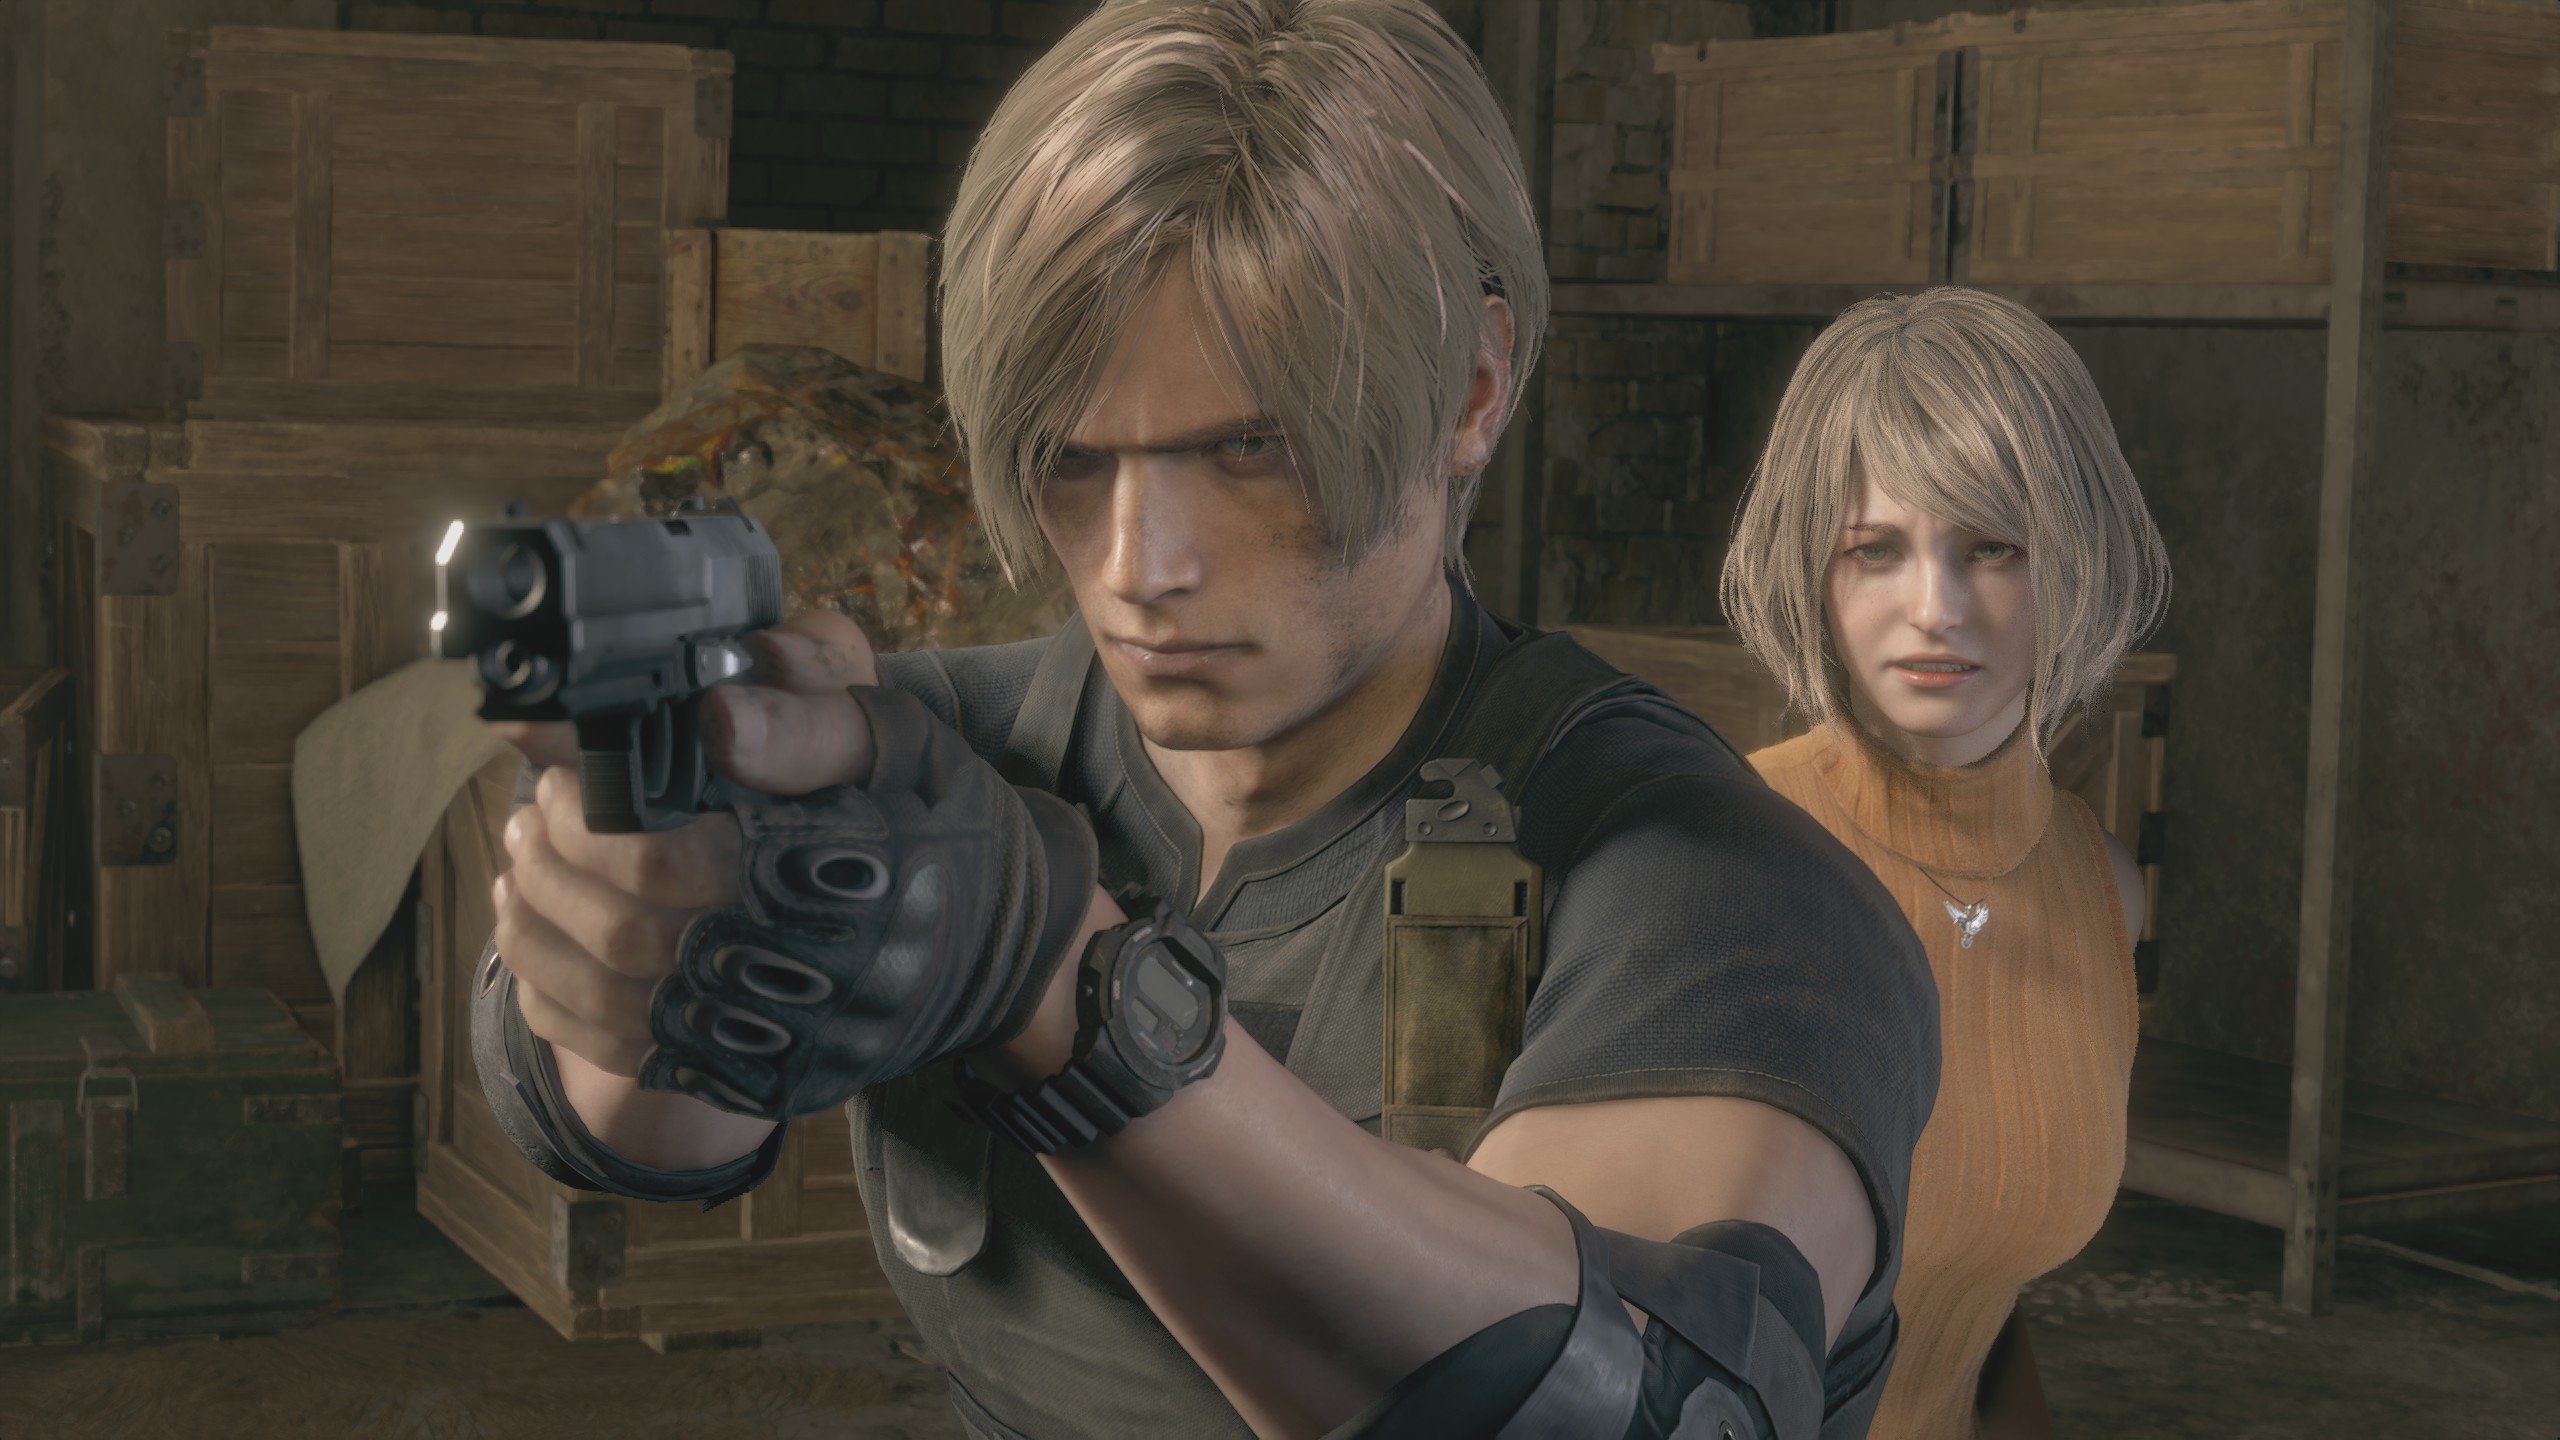 The best way to clear up the church puzzle in Resident Evil 4 Remake